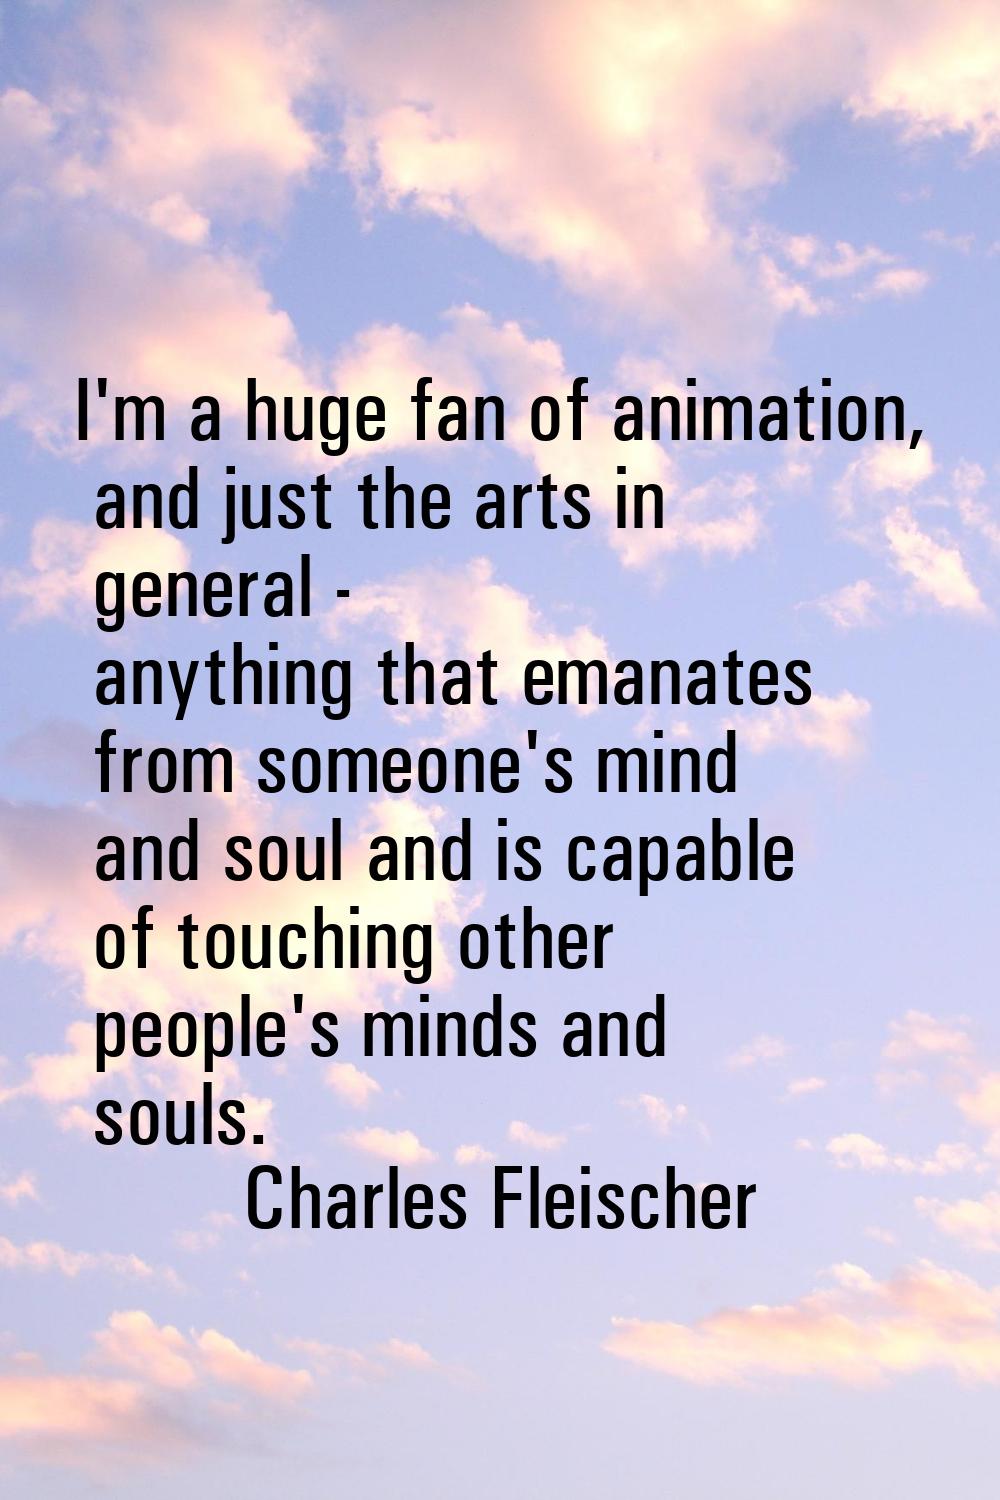 I'm a huge fan of animation, and just the arts in general - anything that emanates from someone's m